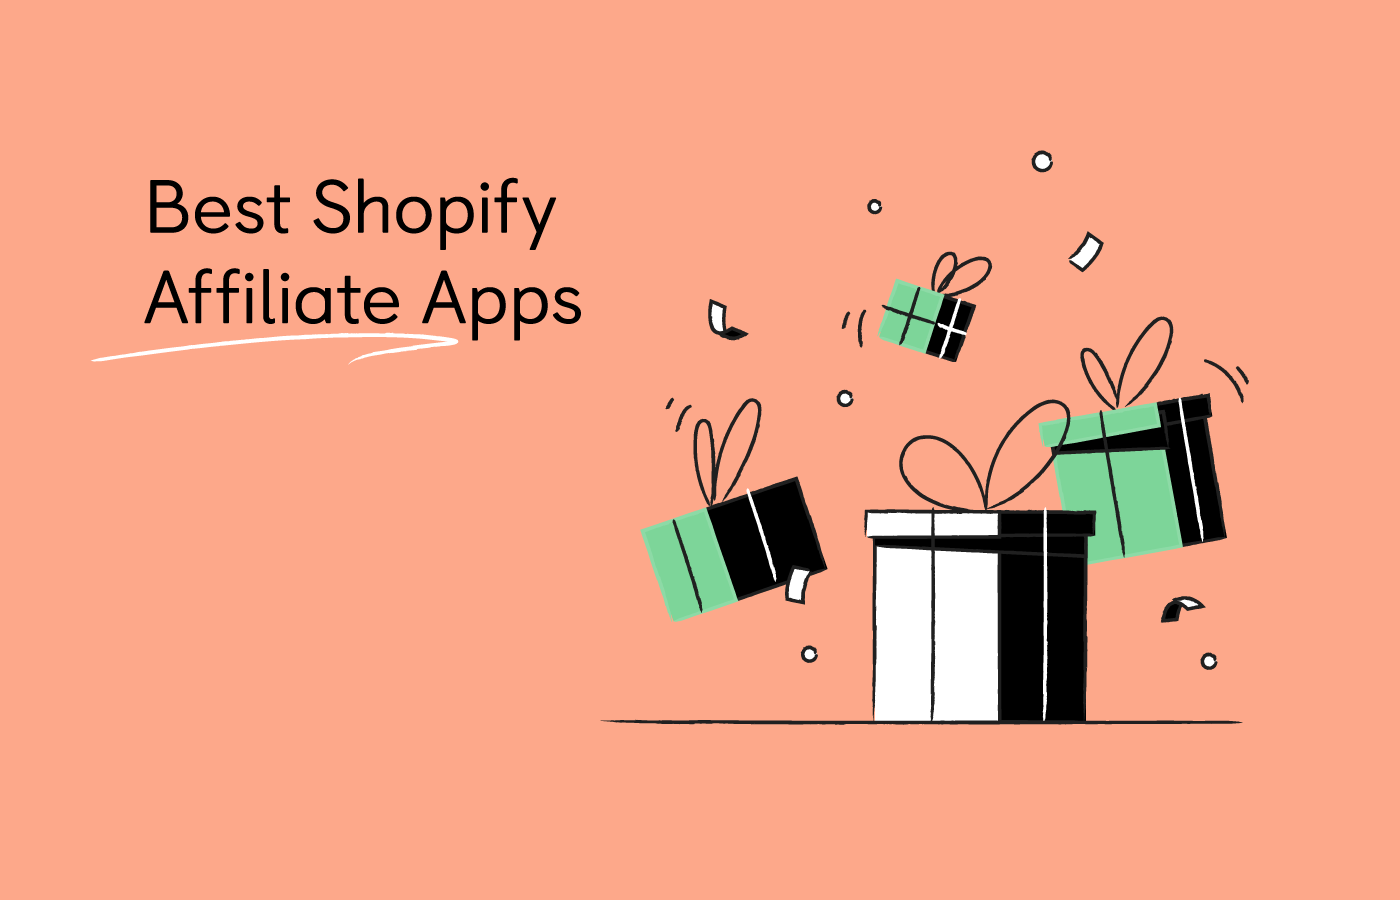 Best Affiliate Apps for Shopify in 2022